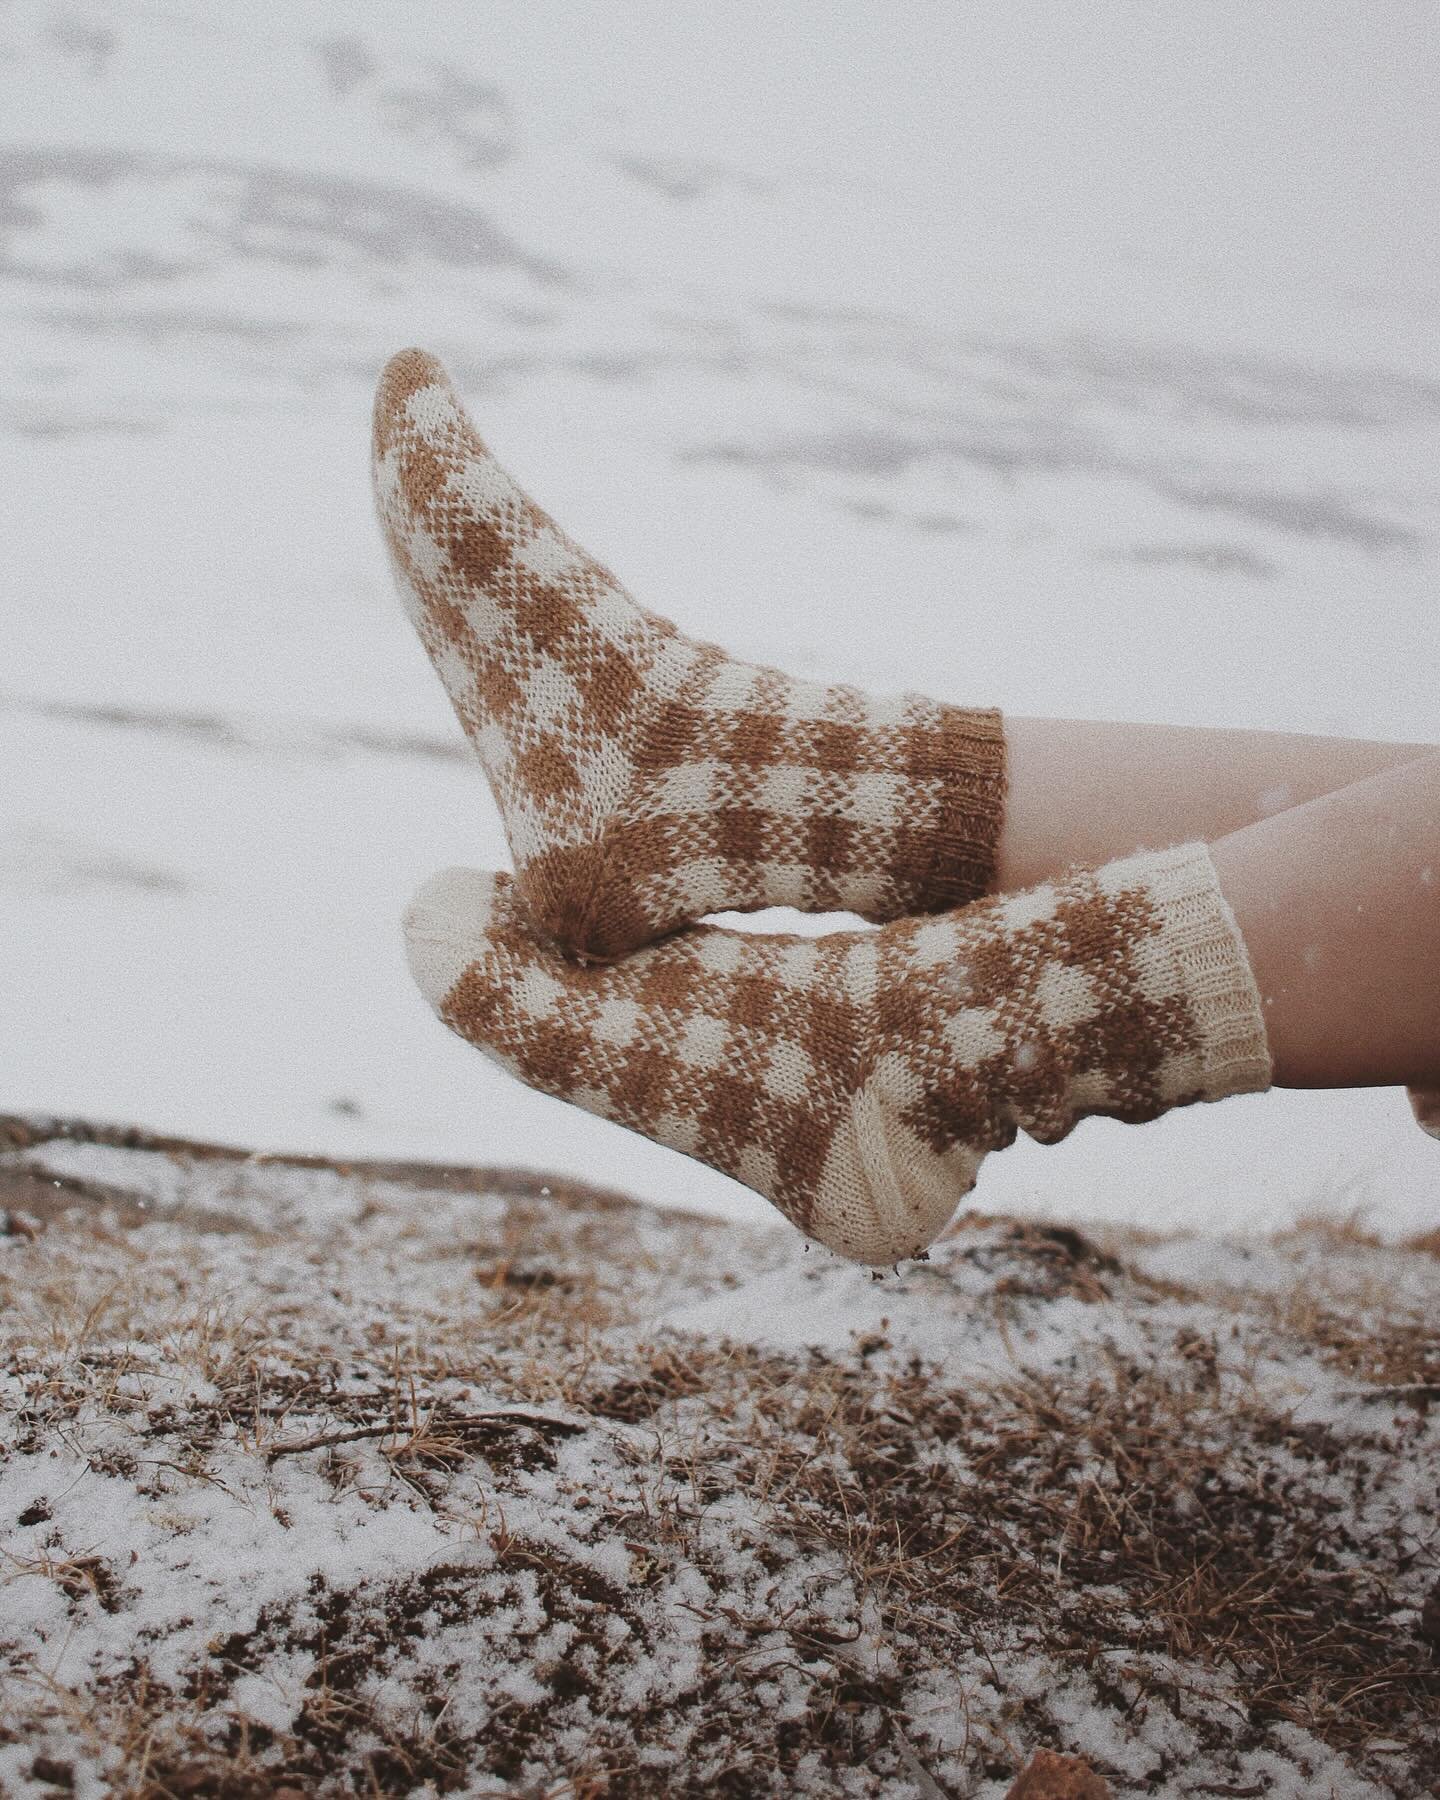 It&rsquo;s giving summer, outdoors and picnics! 🧺🐻🧦🍪

Say hello to shortbread socks, the classic yet trendy pattern. Am I the only one obsessed with the plaid pattern? It&rsquo;s so easy yet so fun to knit! The pattern is available in four langua